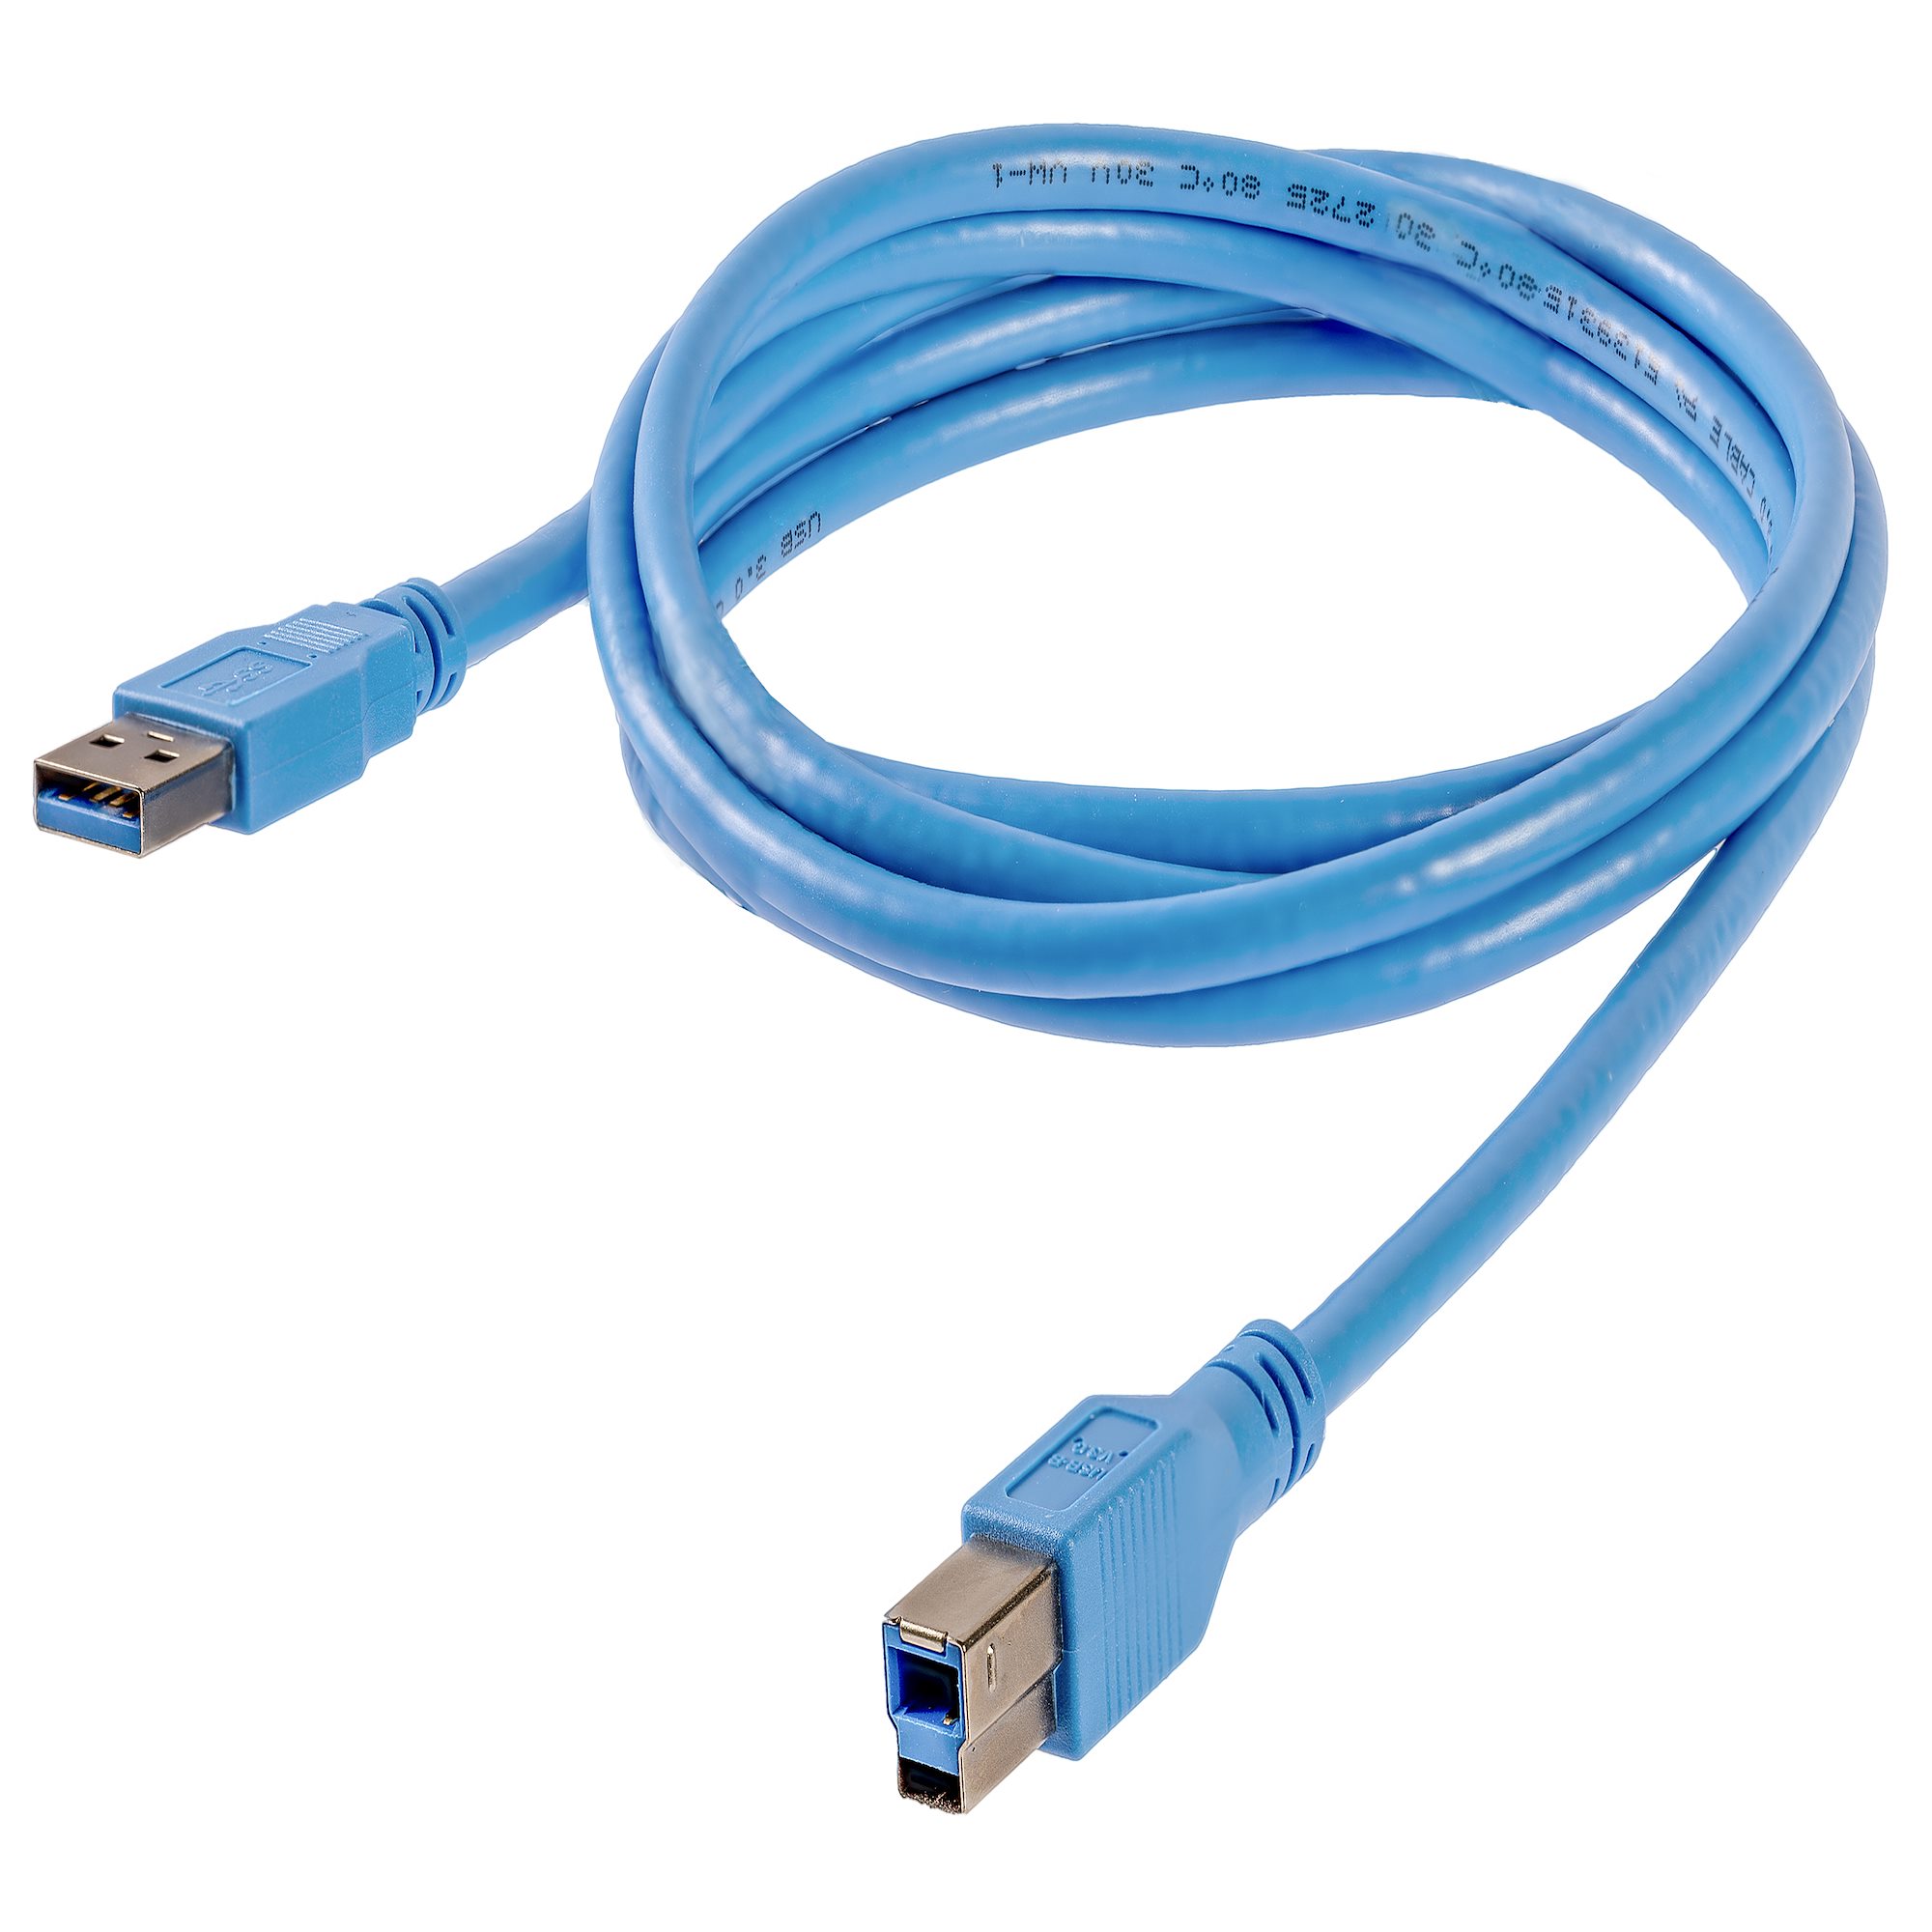 StarTech.com High Speed Certified USB 2.0 USB cable 4 pin USB Type A M 4  pin USB Type B M 3 m USB Hi Speed USB 10ft USB Cable A to B